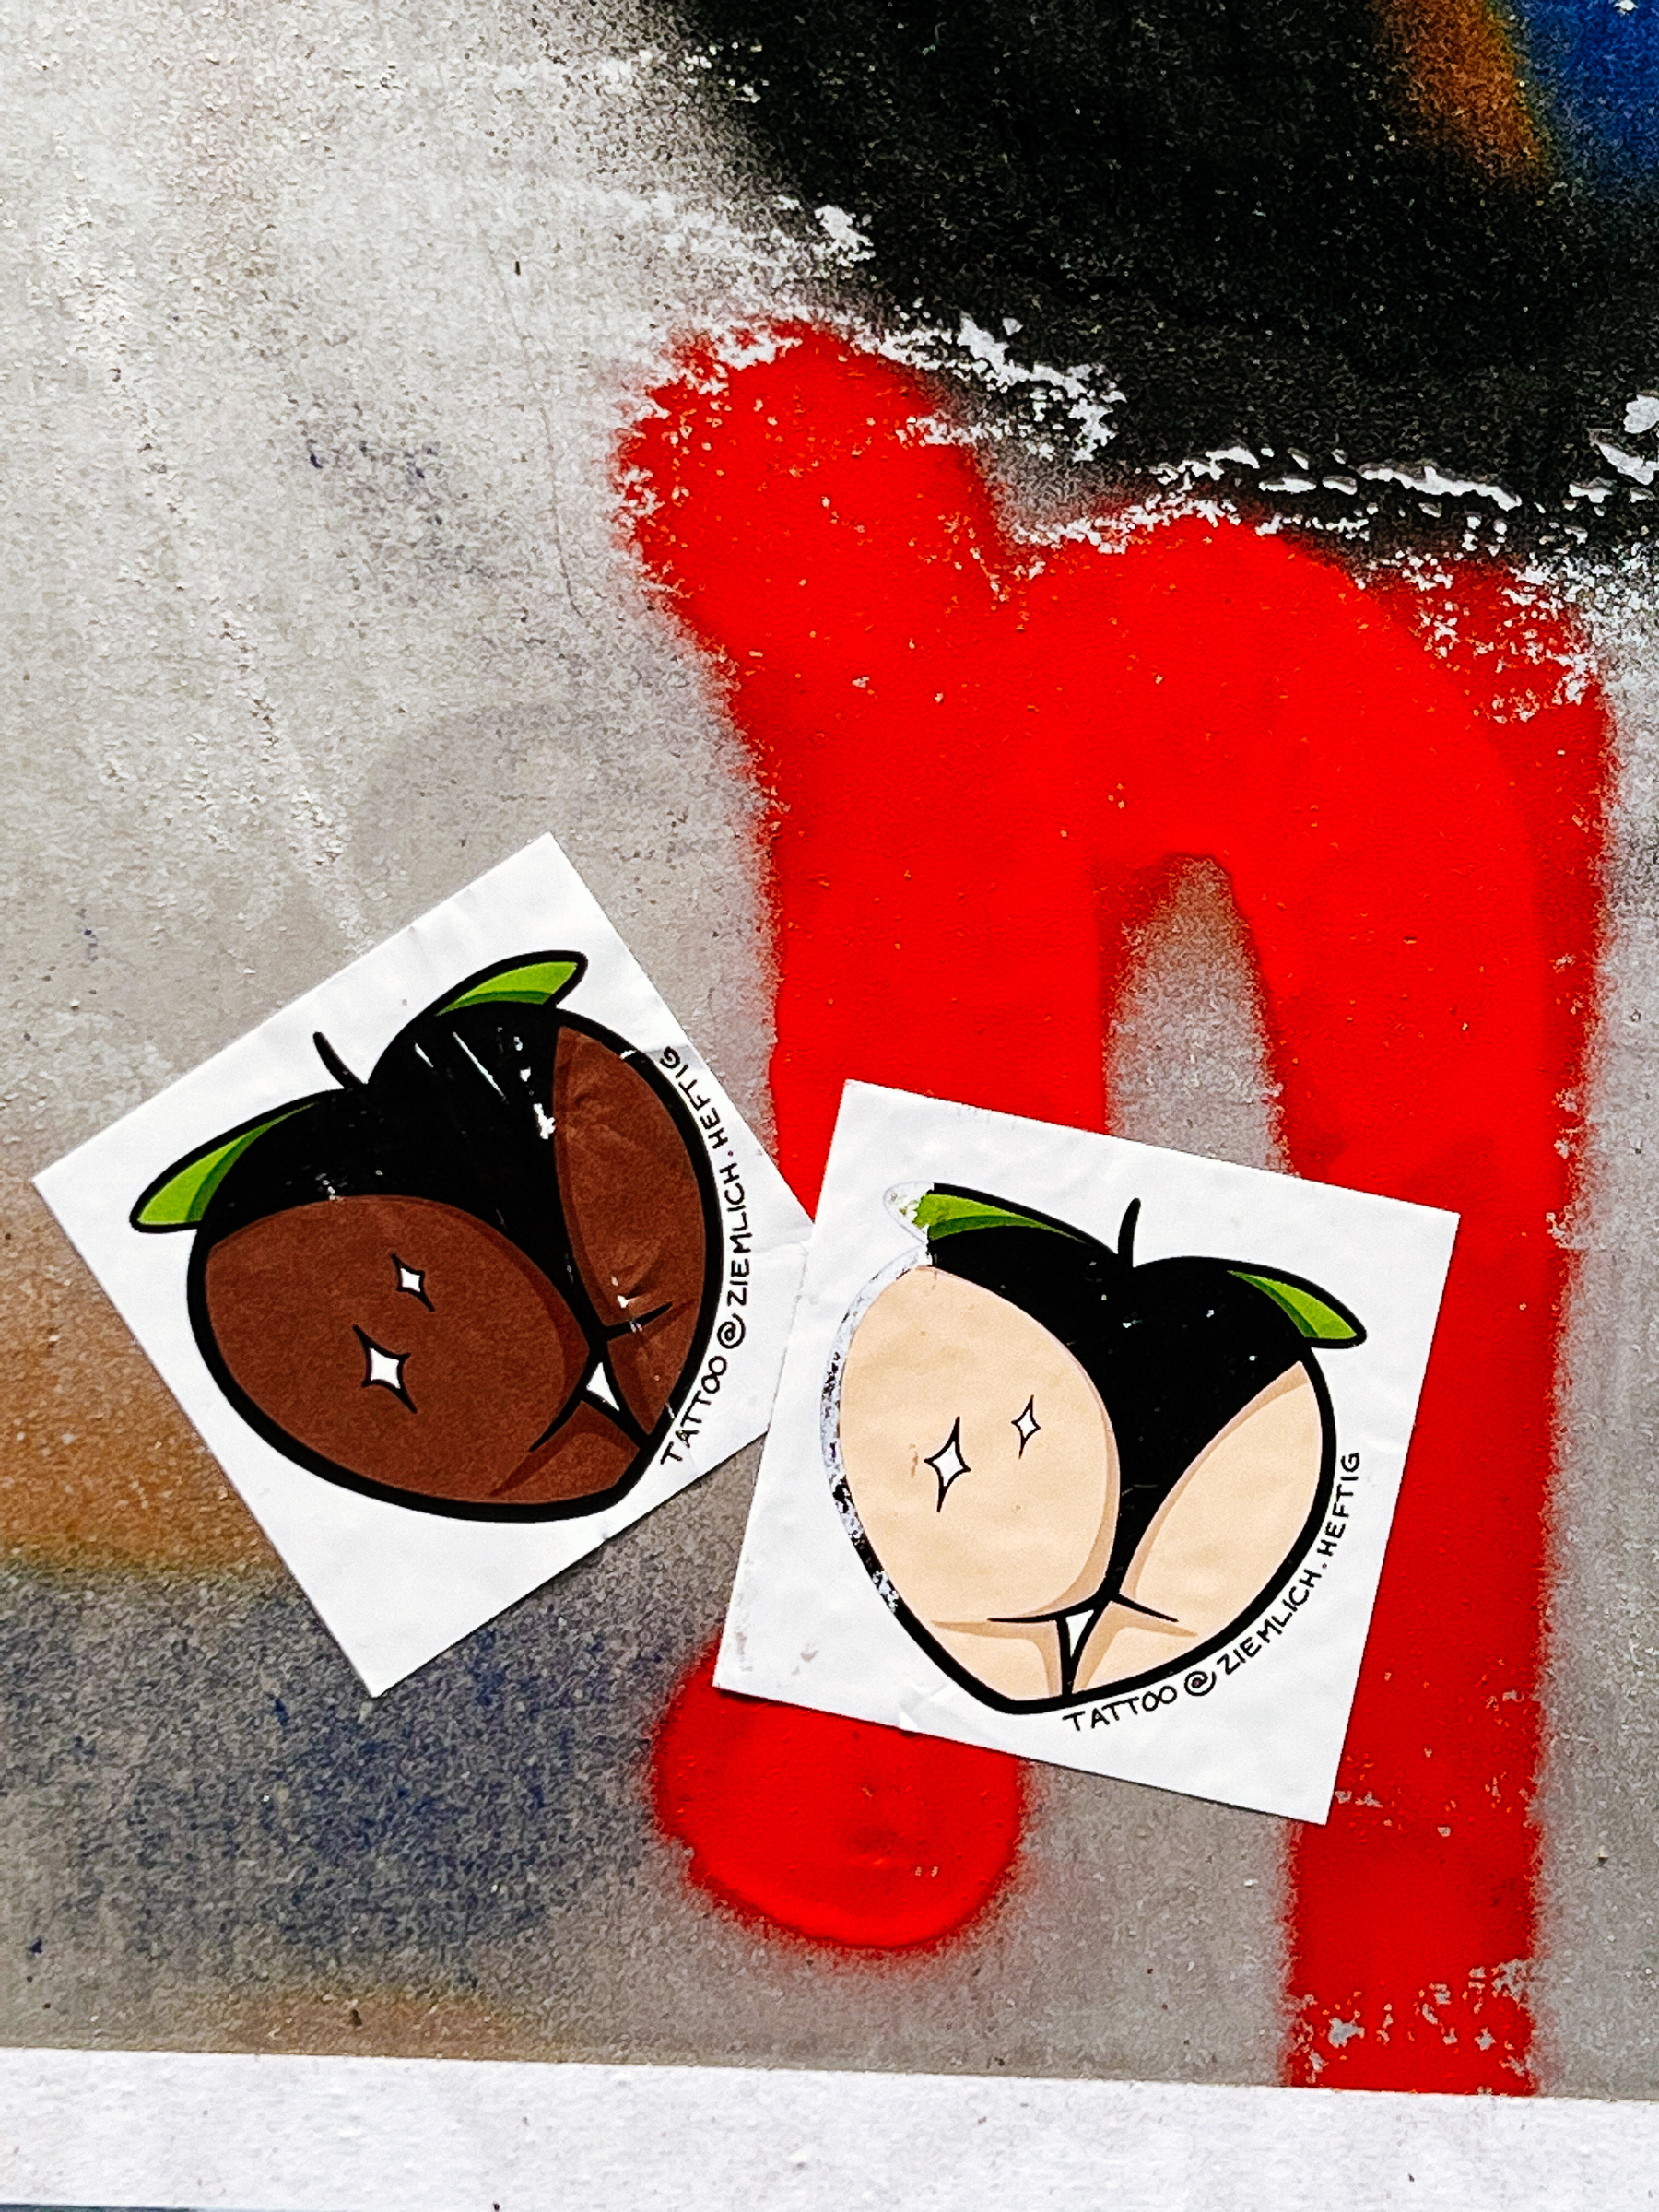 Stickers of what can look like fruit, or maybe a “behind”. One dark skinned, one light skinned. 